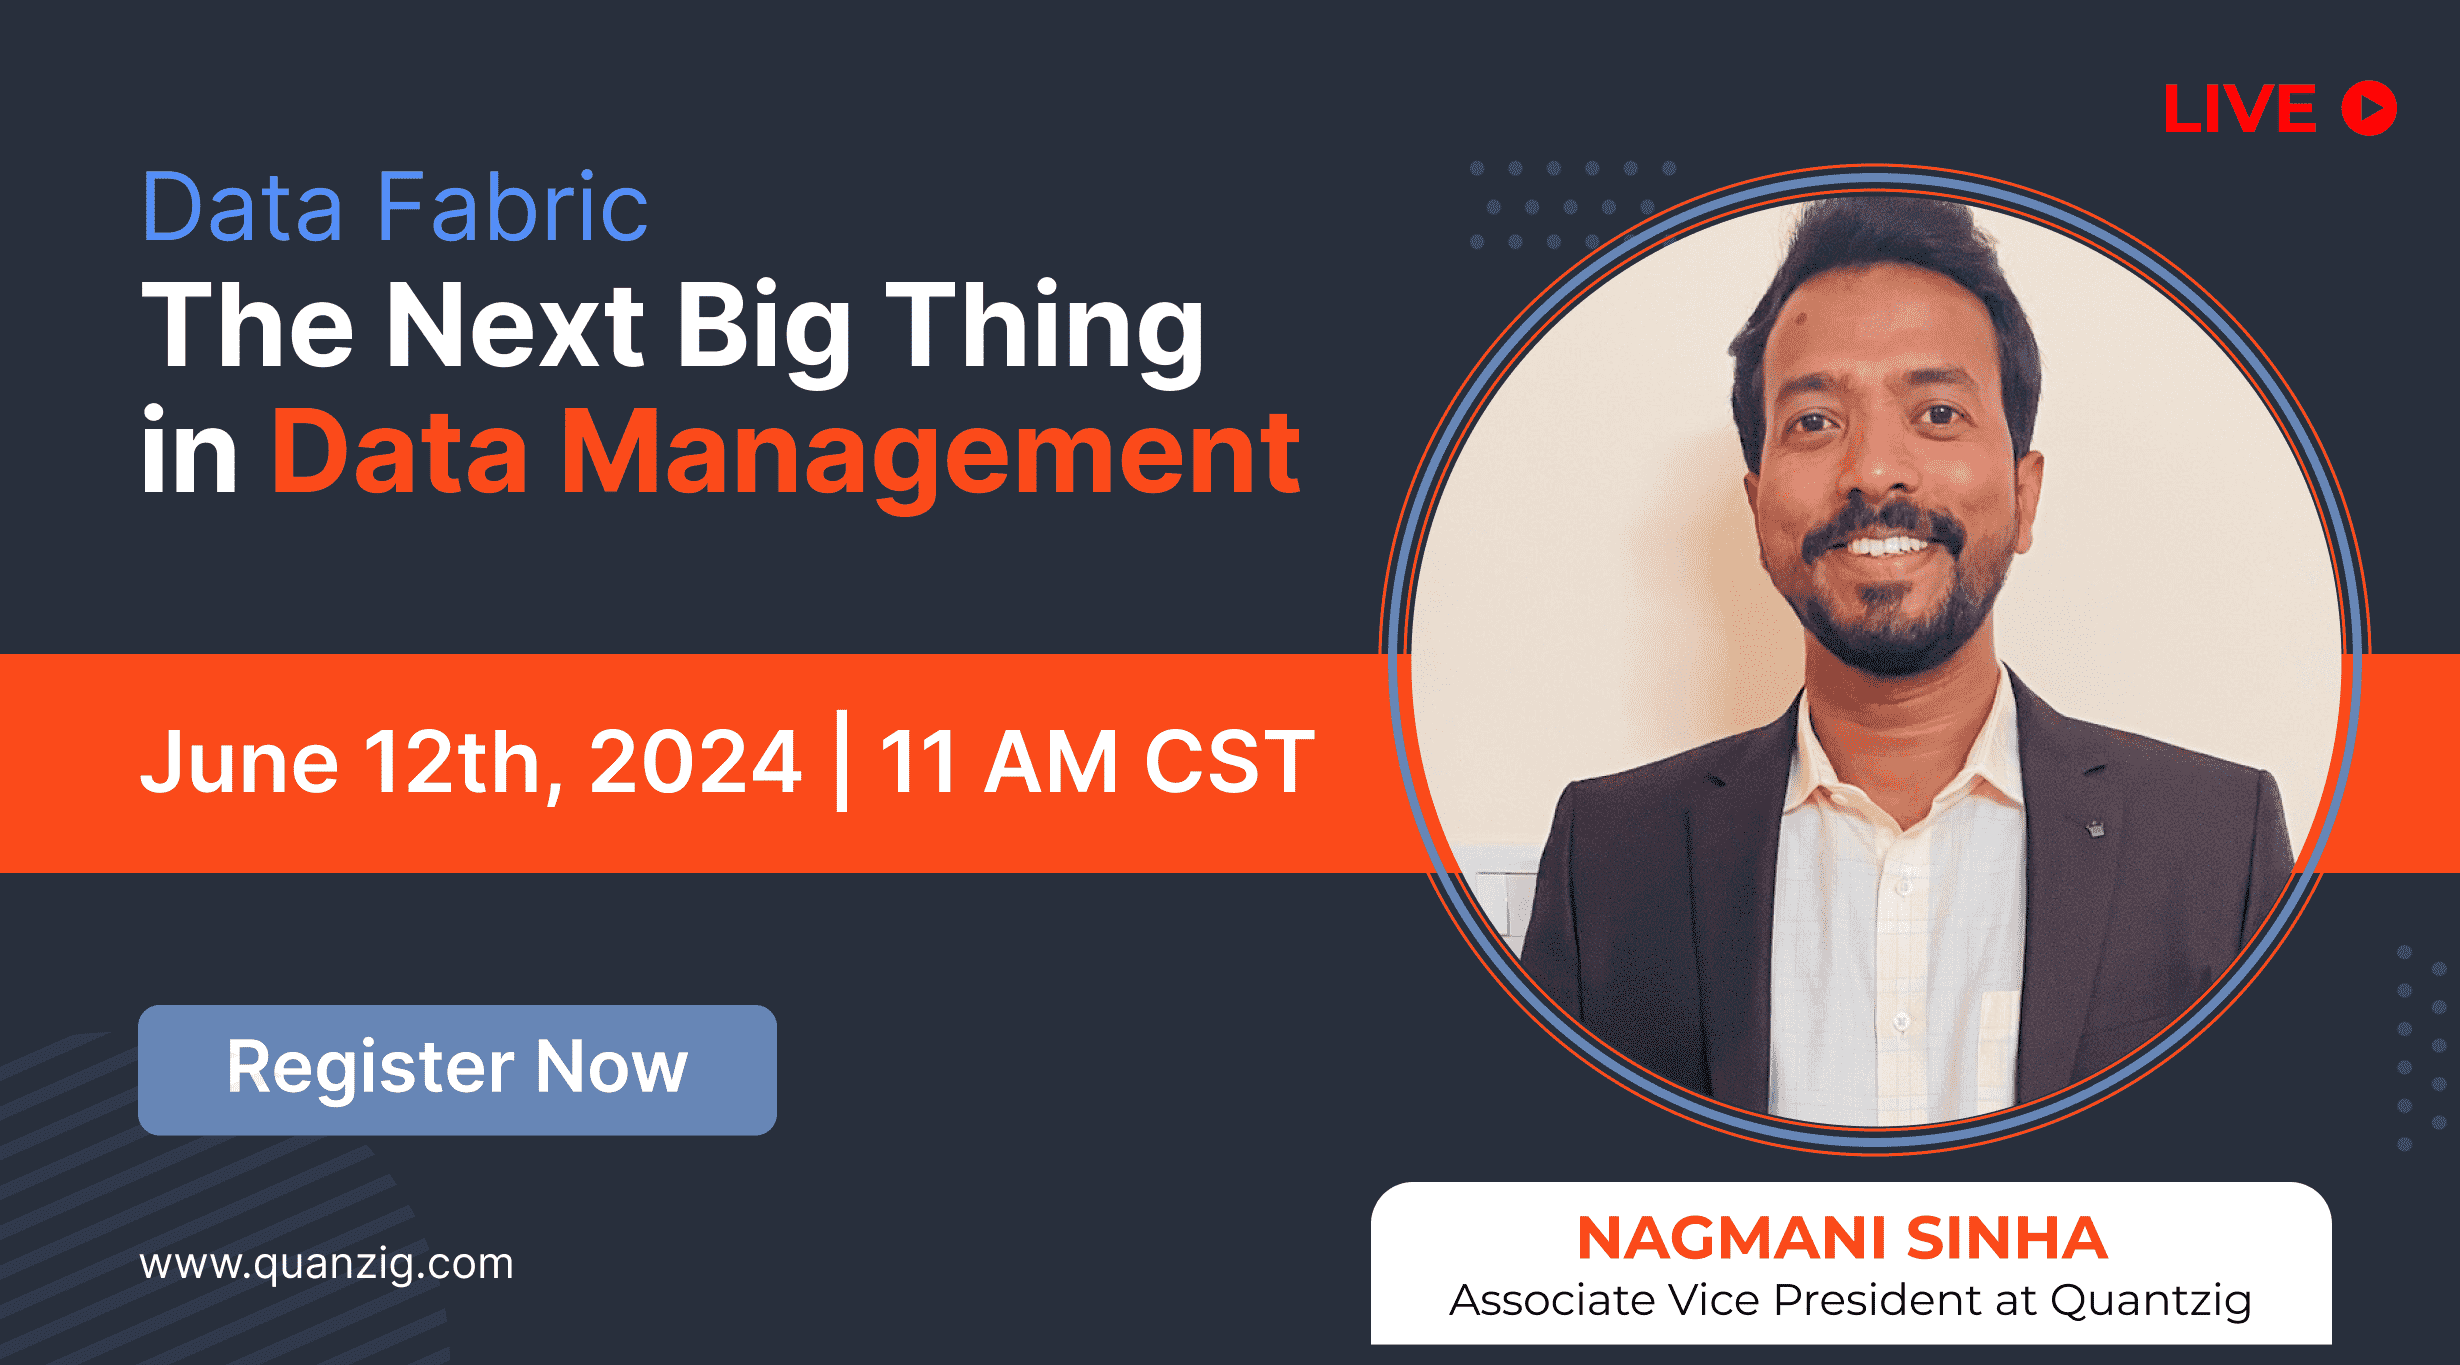 [Webinar] Data Fabric: The Next Big Thing in Data Management 